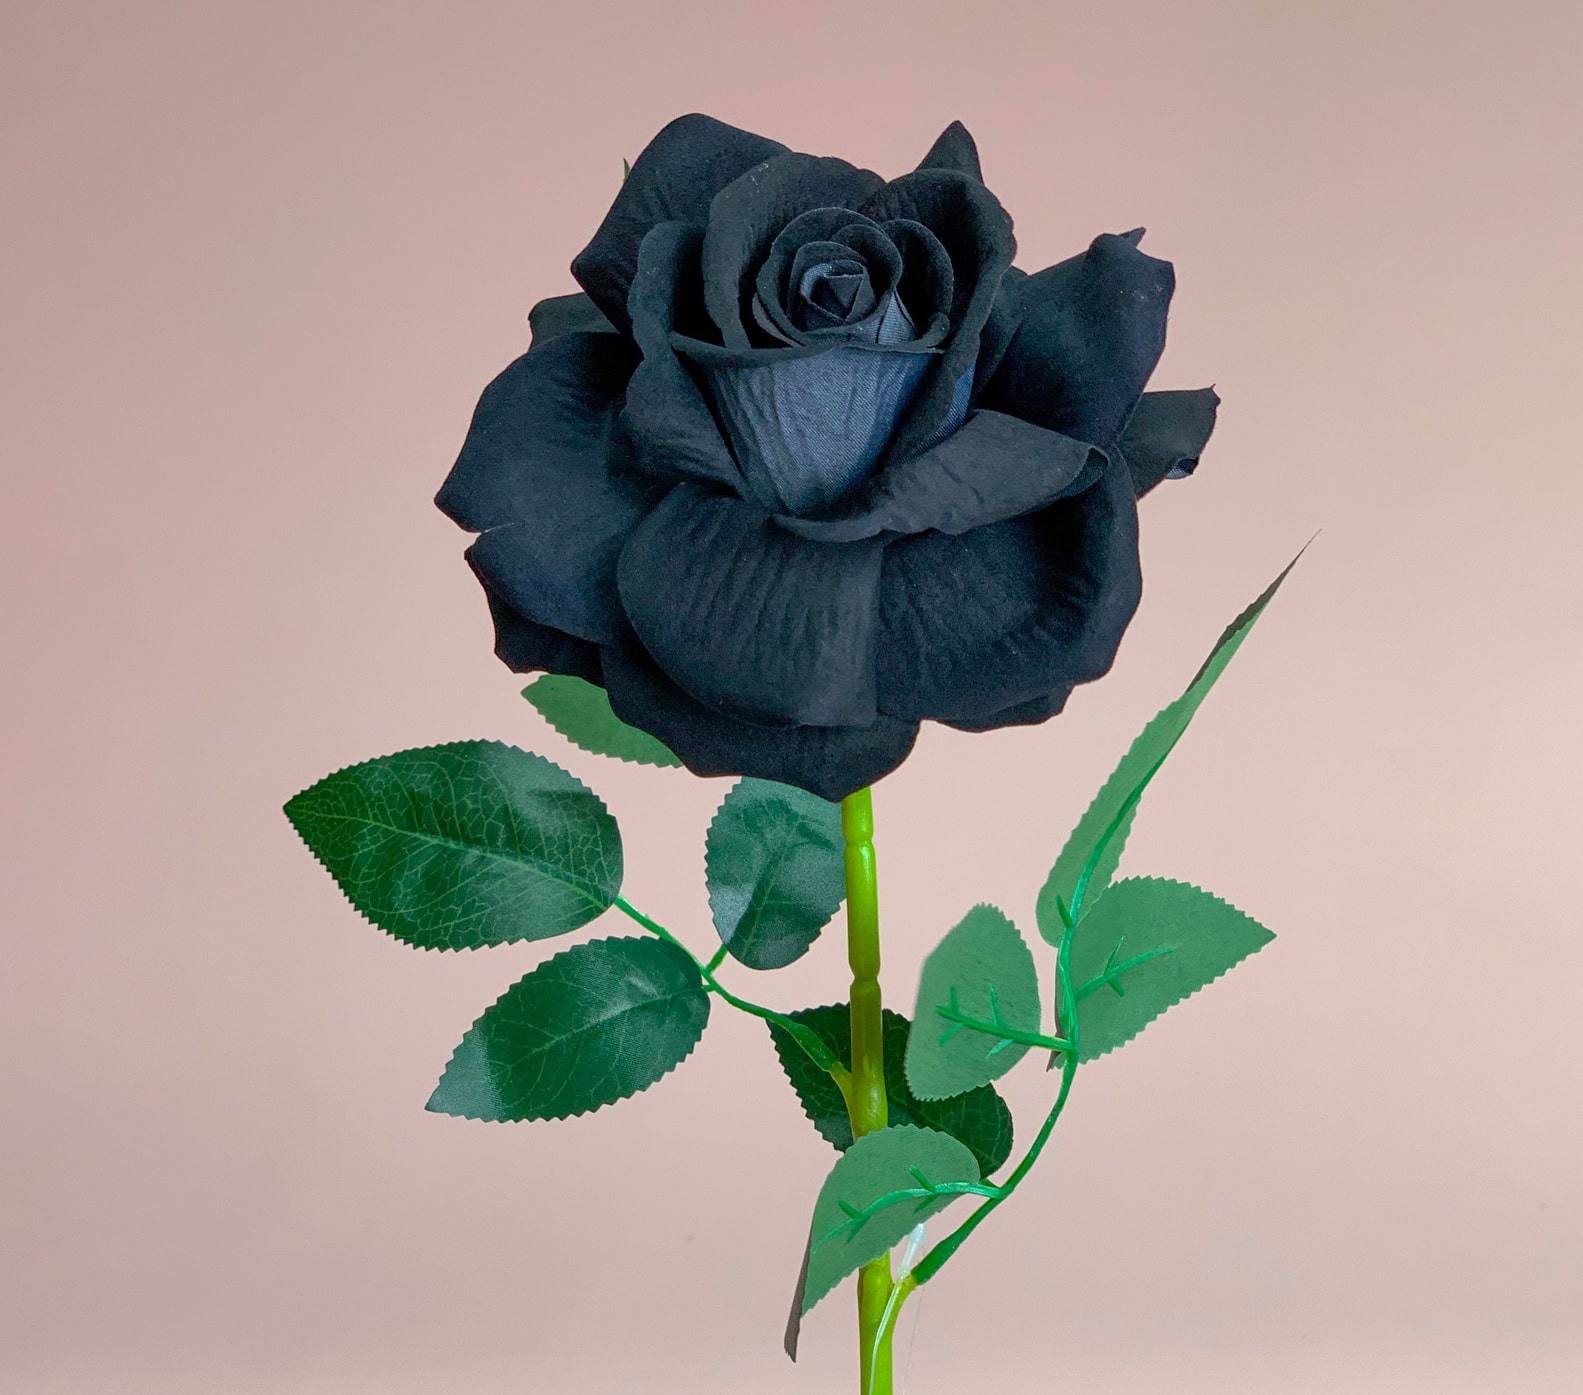 Meaning of Black Roses